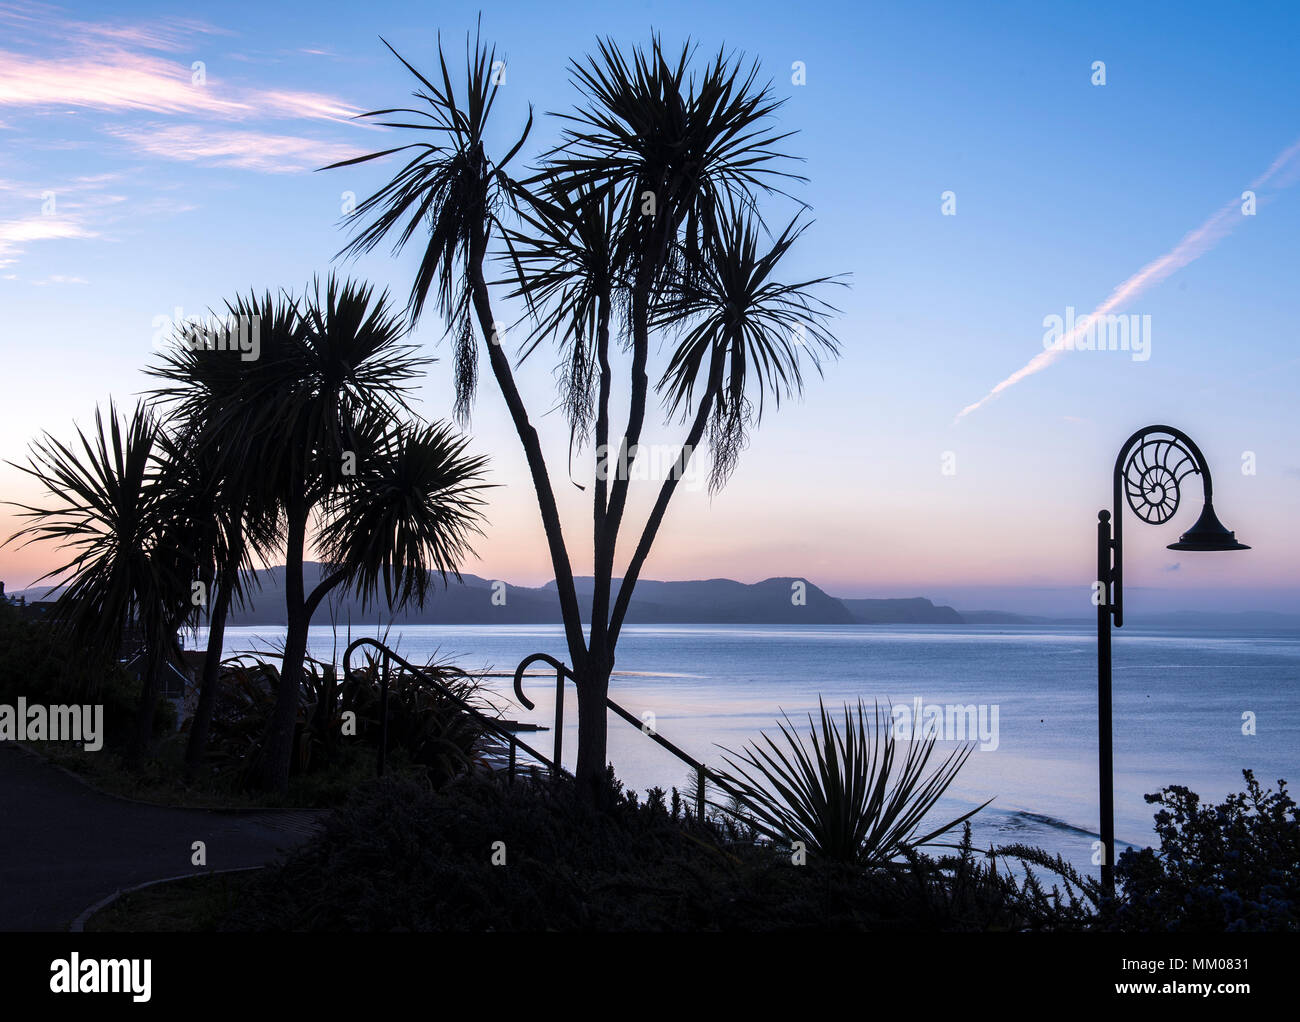 Lyme Regis, Dorset, UK. 9th May 2018. UK Weather: The iconic street lamps and trees are silhouetted against the blue hue and pre dawn colours in the sky over the Jurassic Coast at Lyme Regis.  Cooler weather later will bring and end to the heat wave that many have enjoyed this week. Credit: Celia McMahon/Alamy Live News. Stock Photo